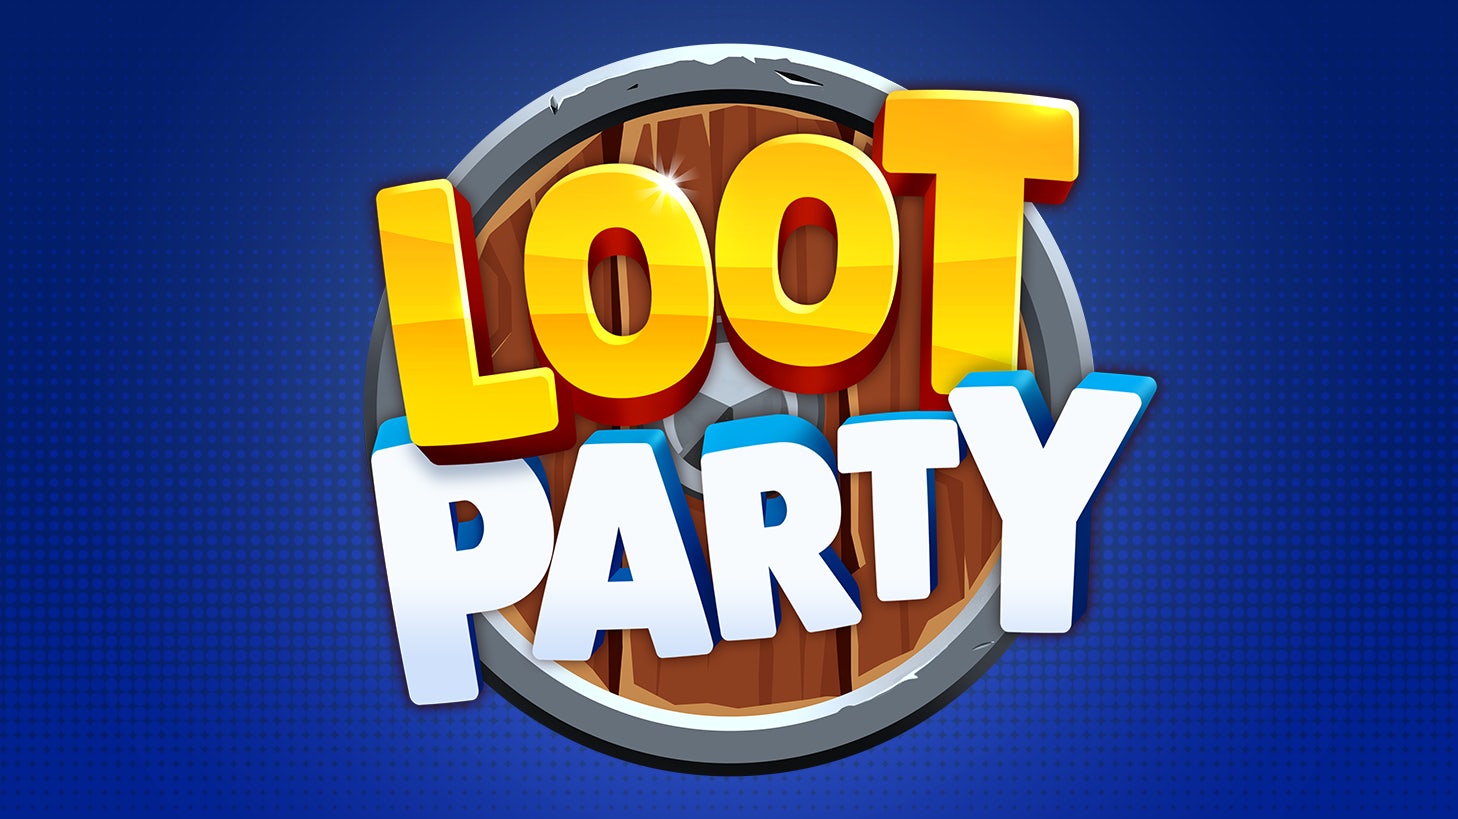 Loot Party